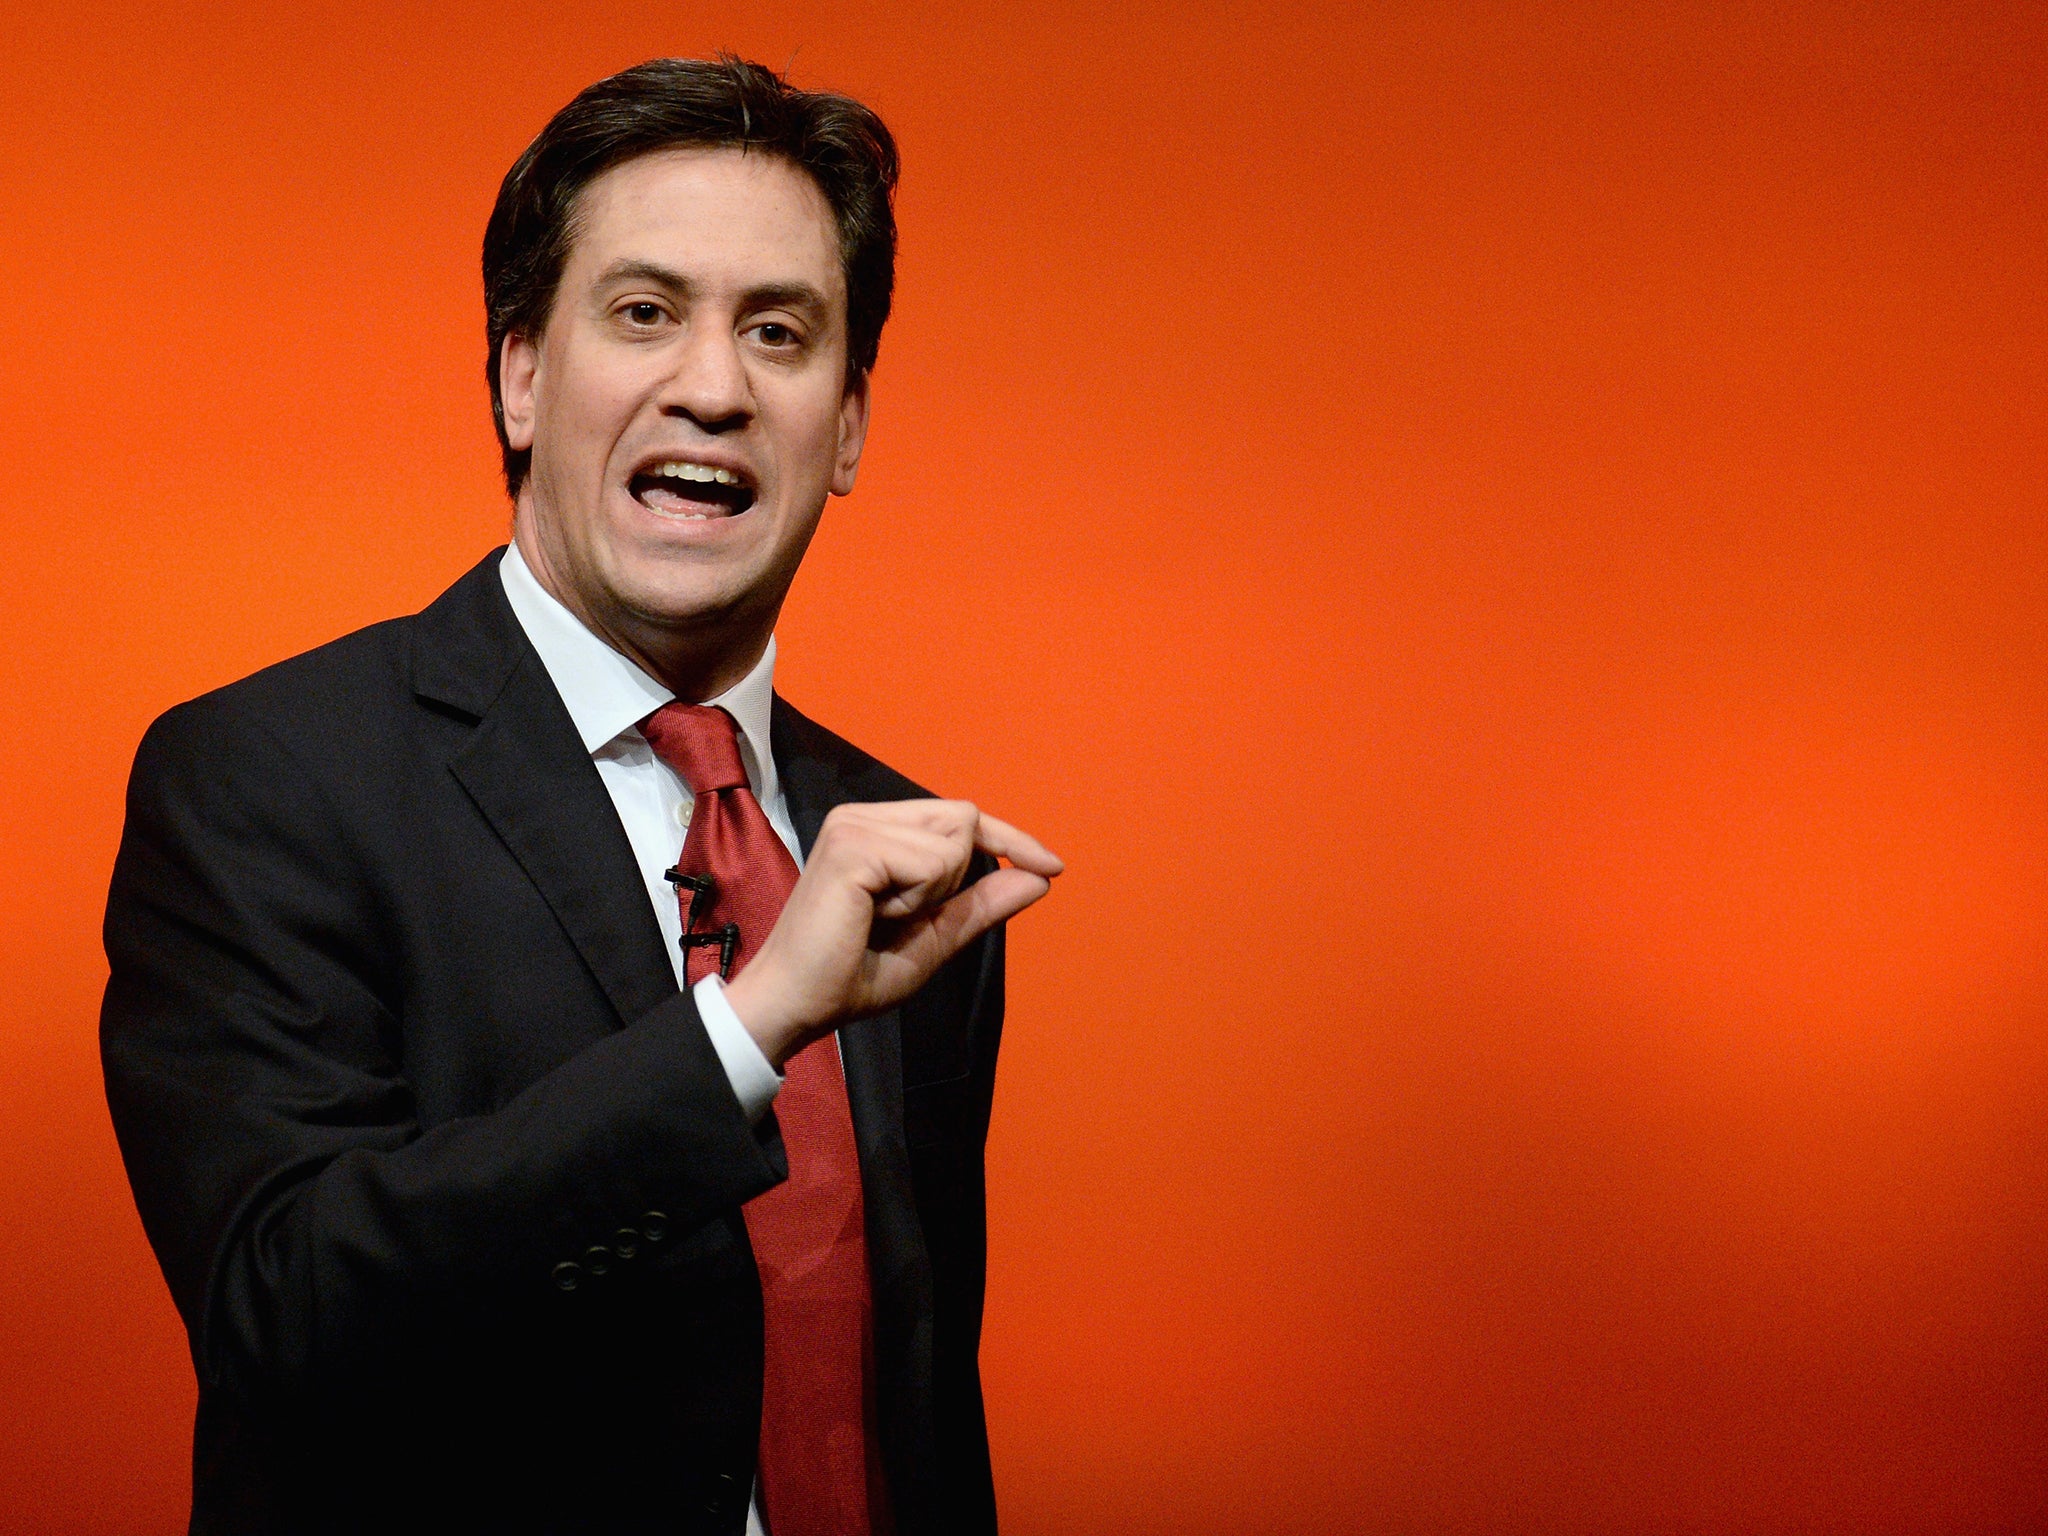 Labour leader Ed Miliband is facing a backlash from senior members of the party